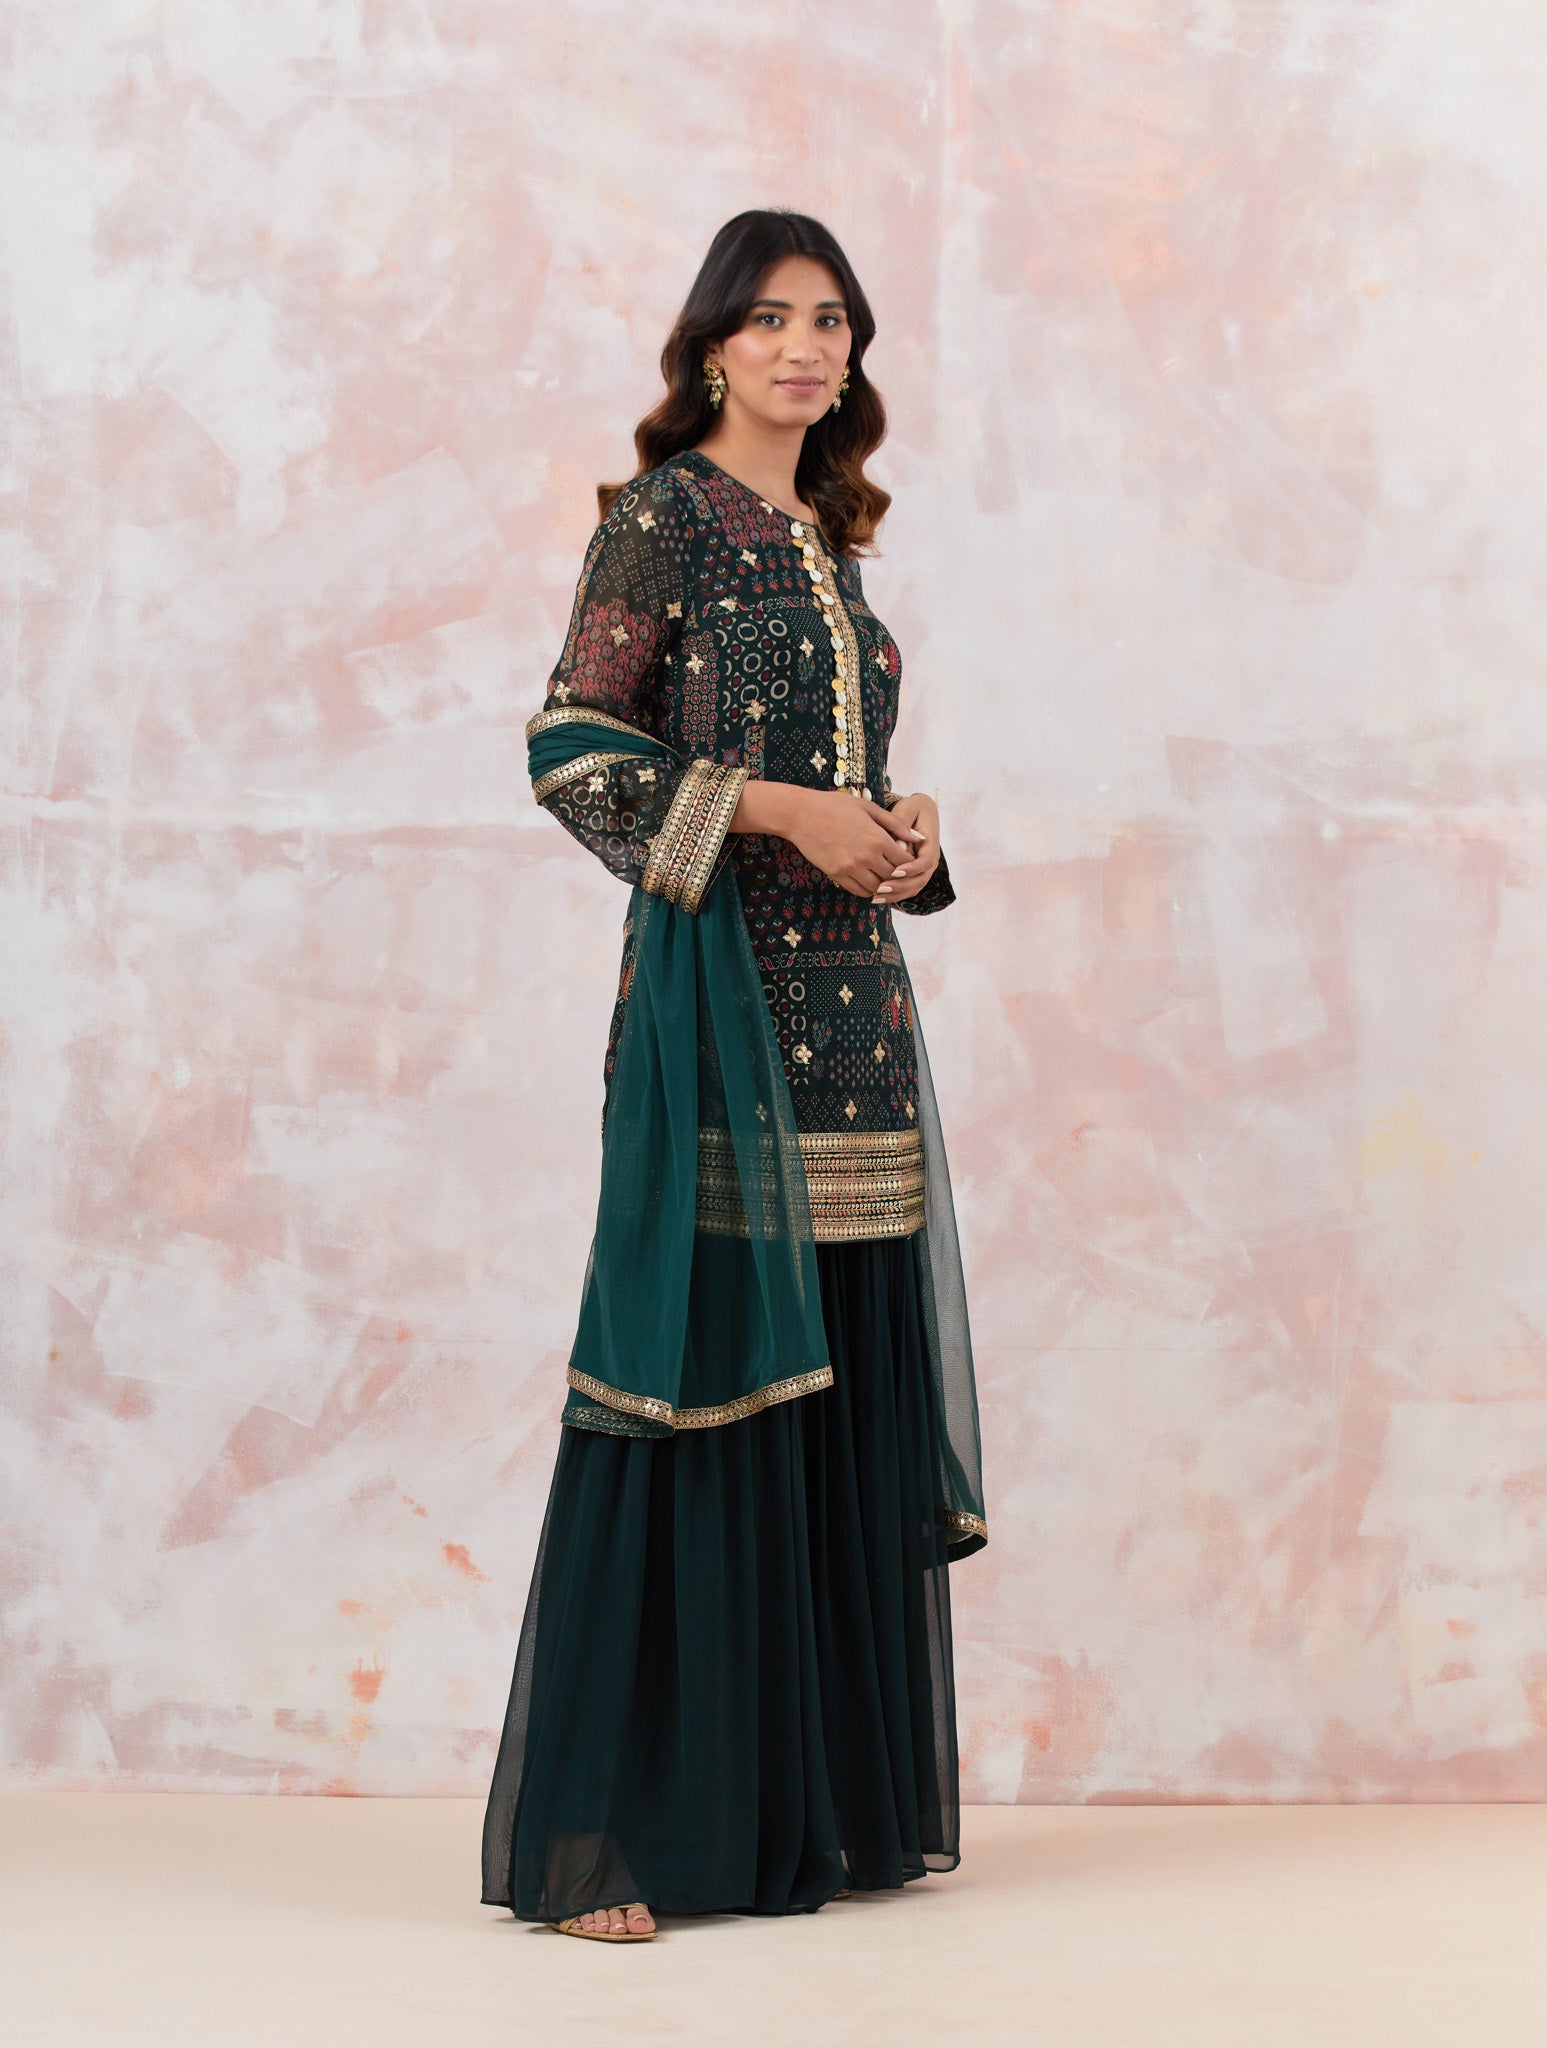 Bottle Green Stylish Embroidered Sharara Suit SetBuy Bottle green sharara set featuring Kurta with foil work, shells, and coin detailing, also plain sharara  It is best for occasions & parties. Dazzle on weddings and special occasions with exquisite Indian designer dresses, sharara suits, Anarkali suits, and wedding lehengas from Pure Elegance Indian fashion store in the USA.